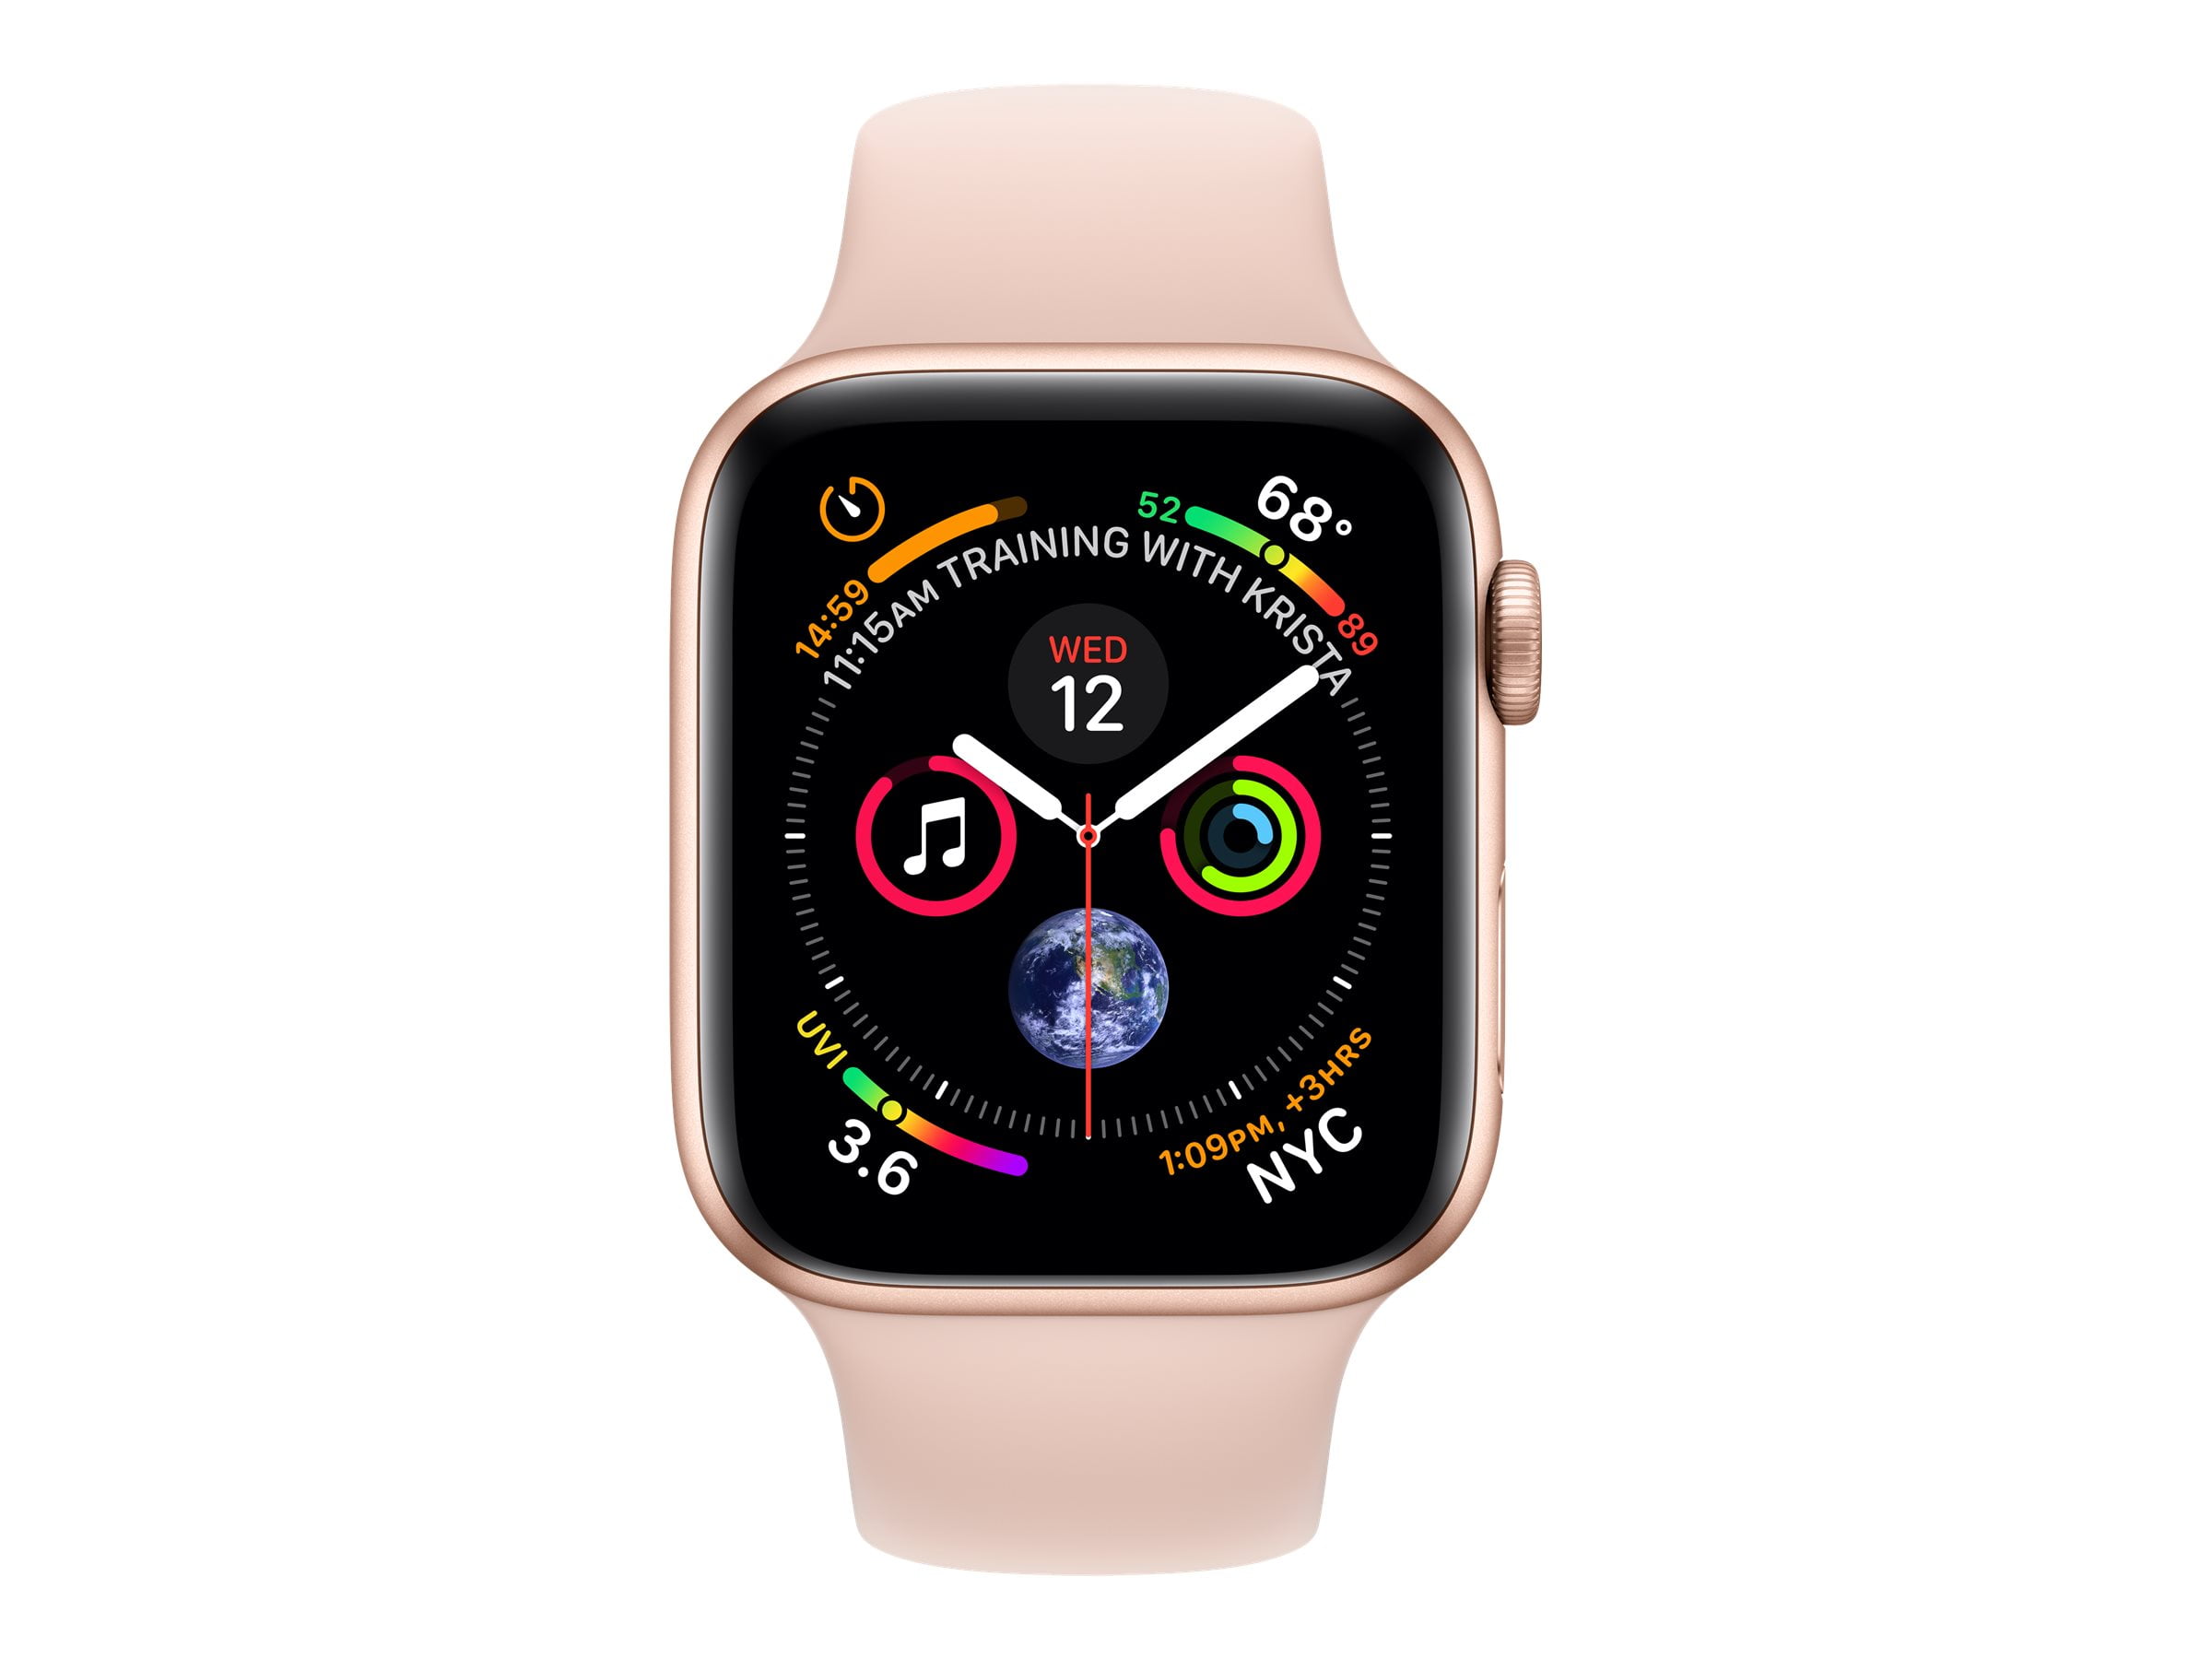 Apple Watch Series 4 (GPS + Cellular) - 40 mm - gold aluminum - smart watch  with sport band - fluoroelastomer - pink sand - wrist size: 5.12 in - 7.87  